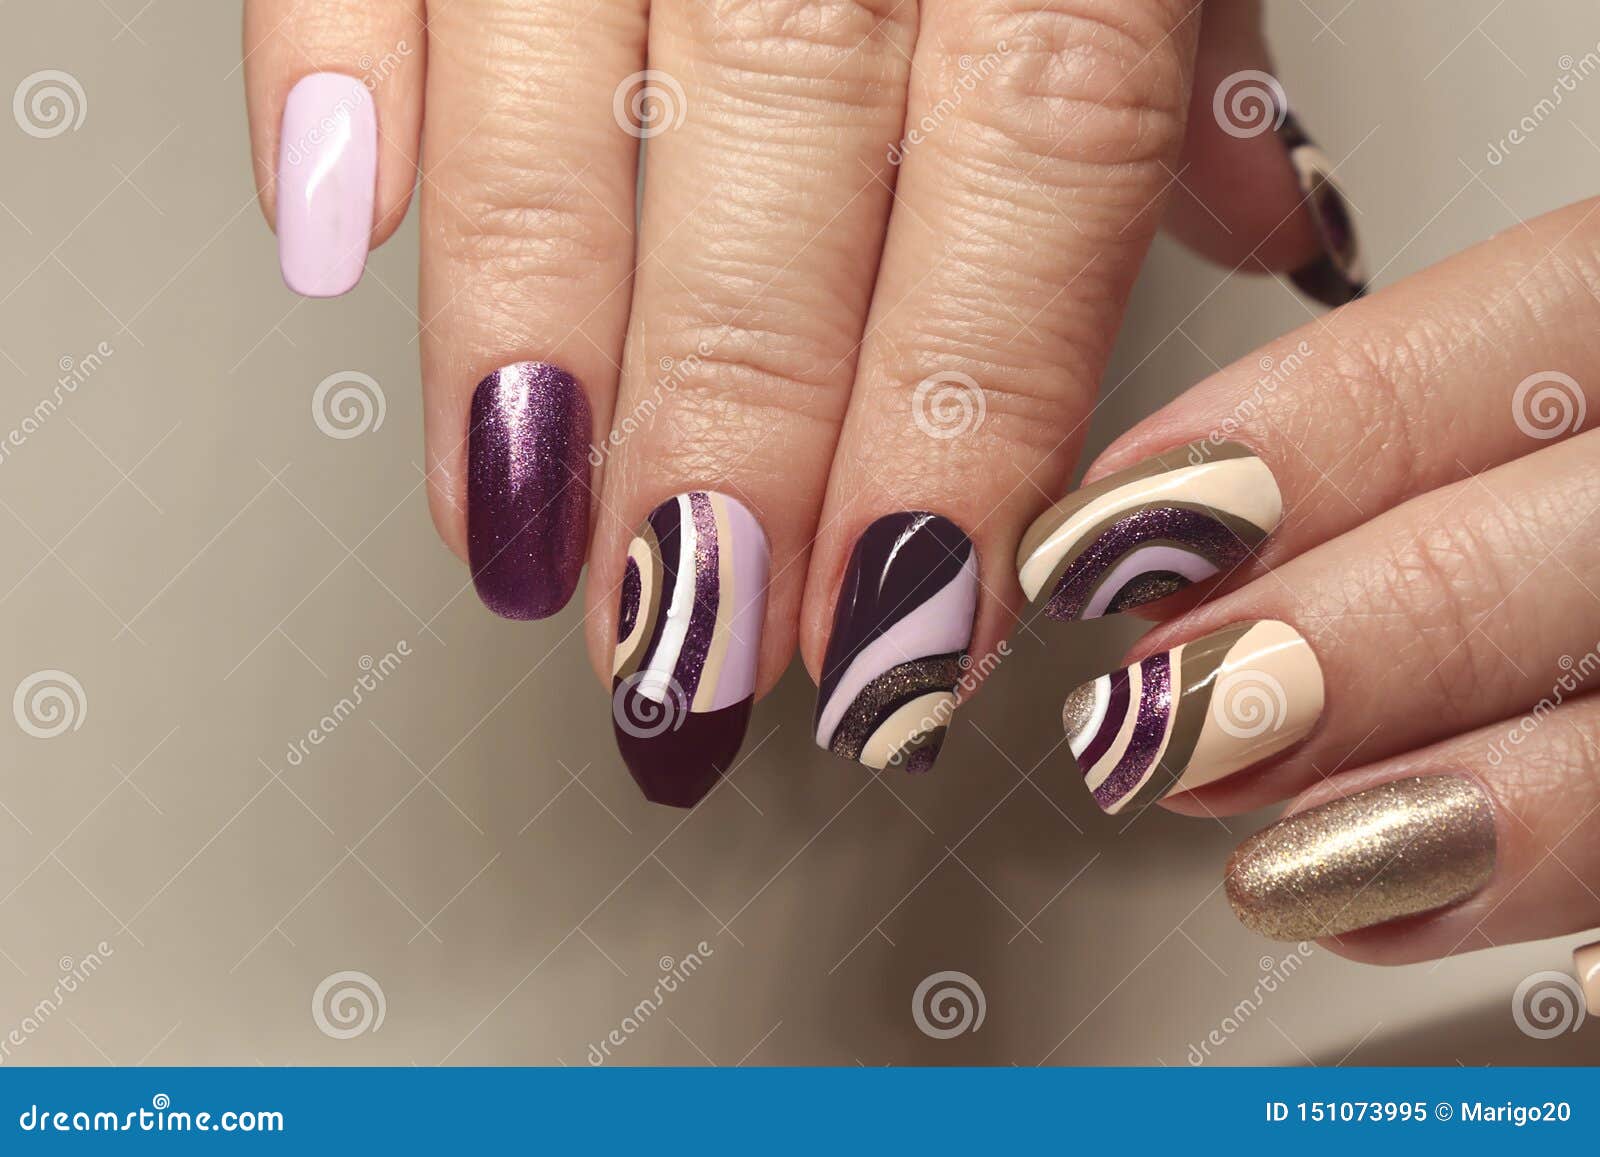 Manicure on a Different Form of Nails Stock Image - Image of design, body:  151073995